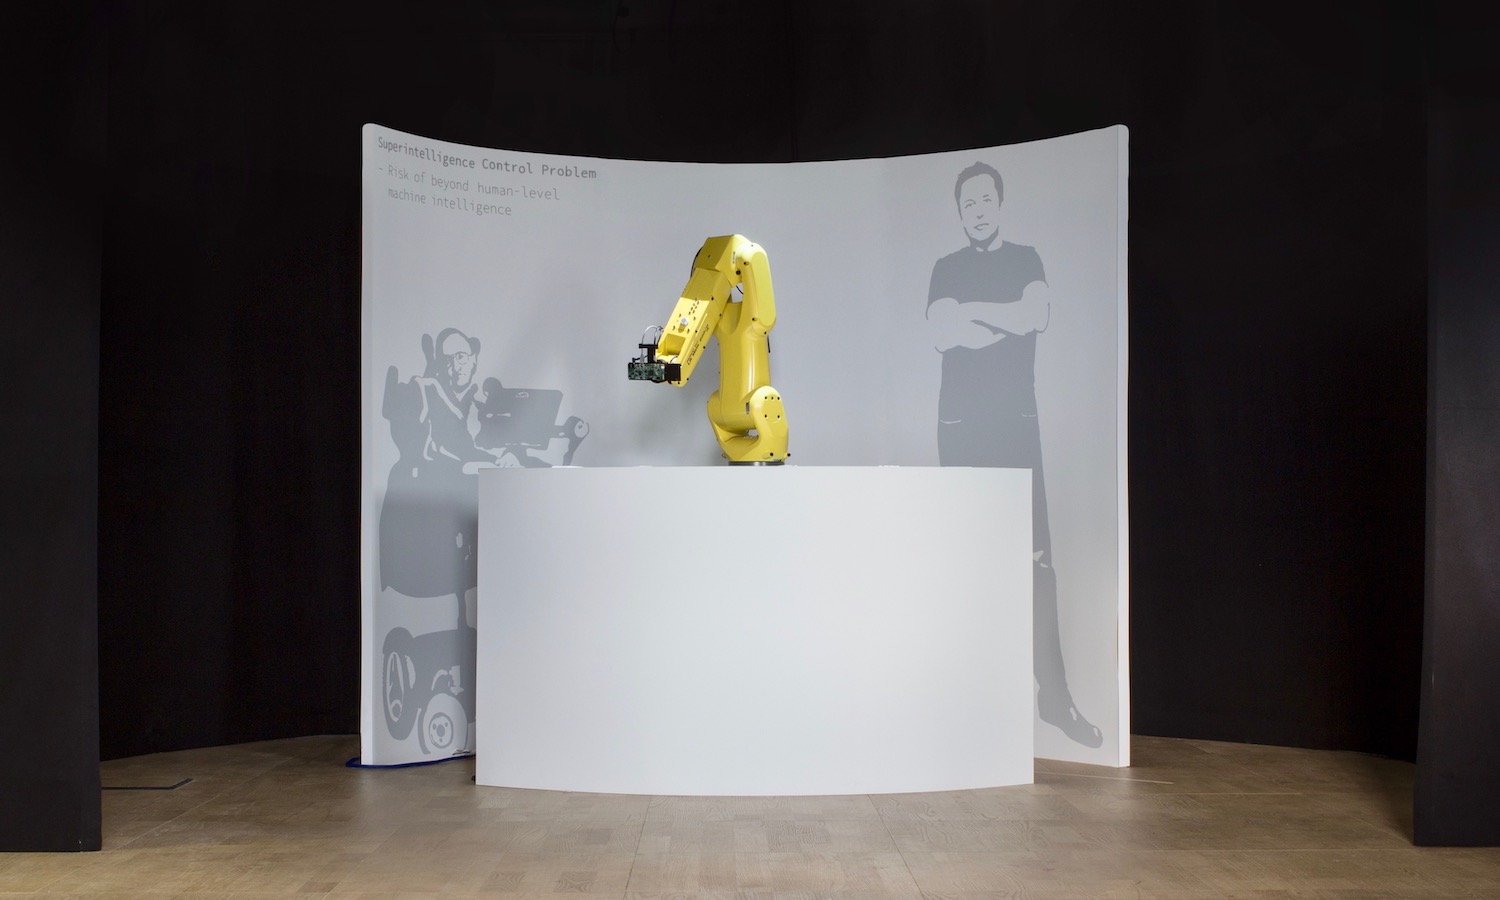 The result: Completed exhibition with a desk in the front, robot in the center, backdrop with silhouettes, and exits on the sides.